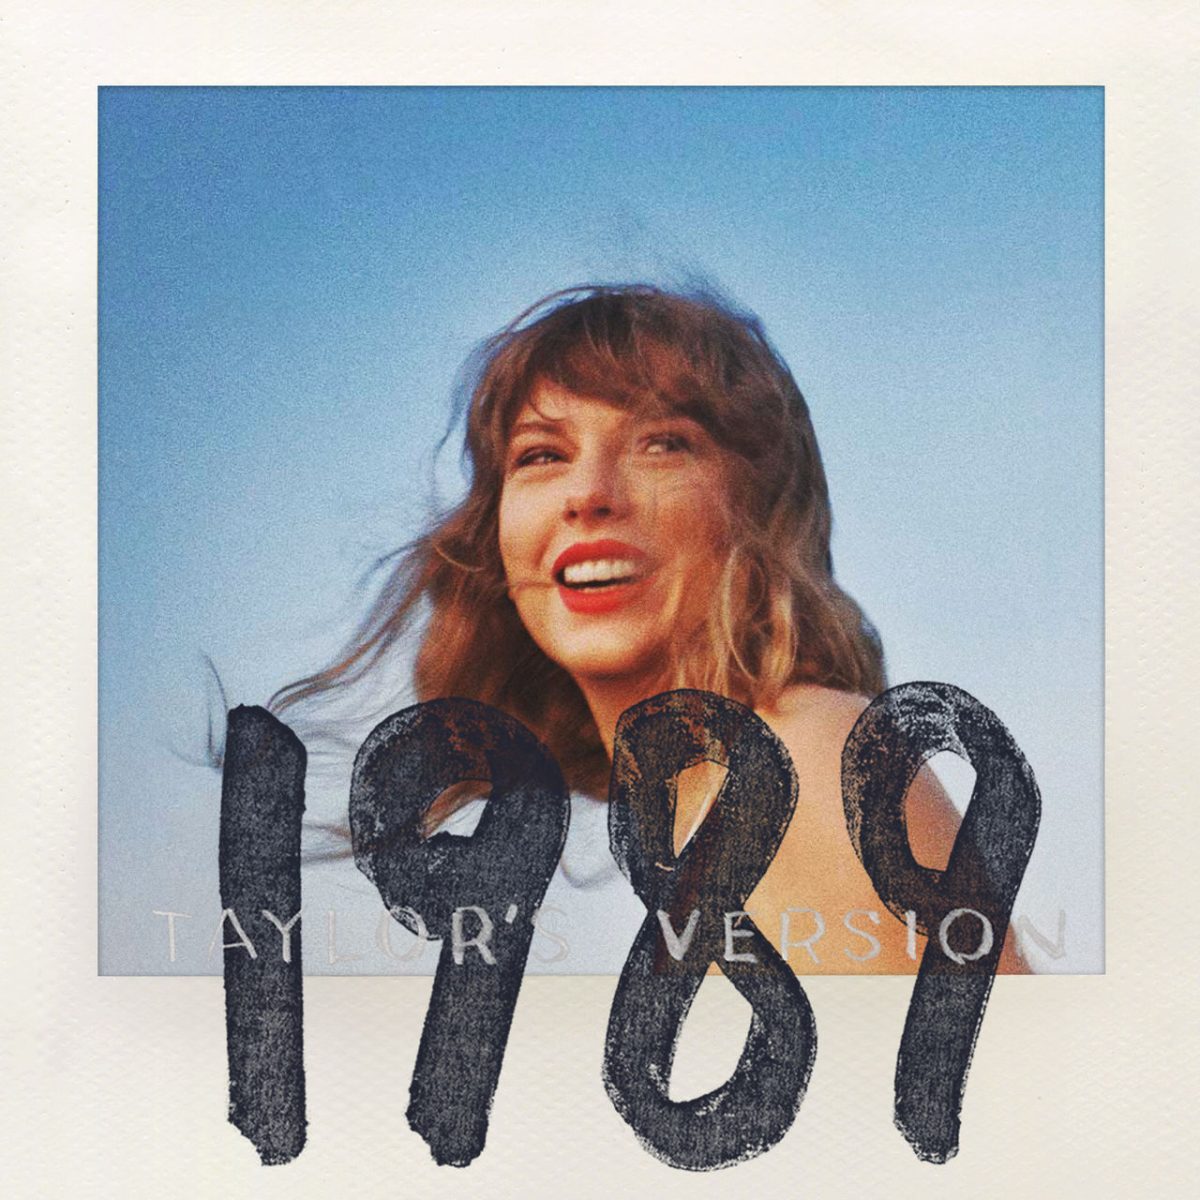 Taylor Swift brings back 2014 with 1989 Taylors Version and publishes The Eras Tour Movie